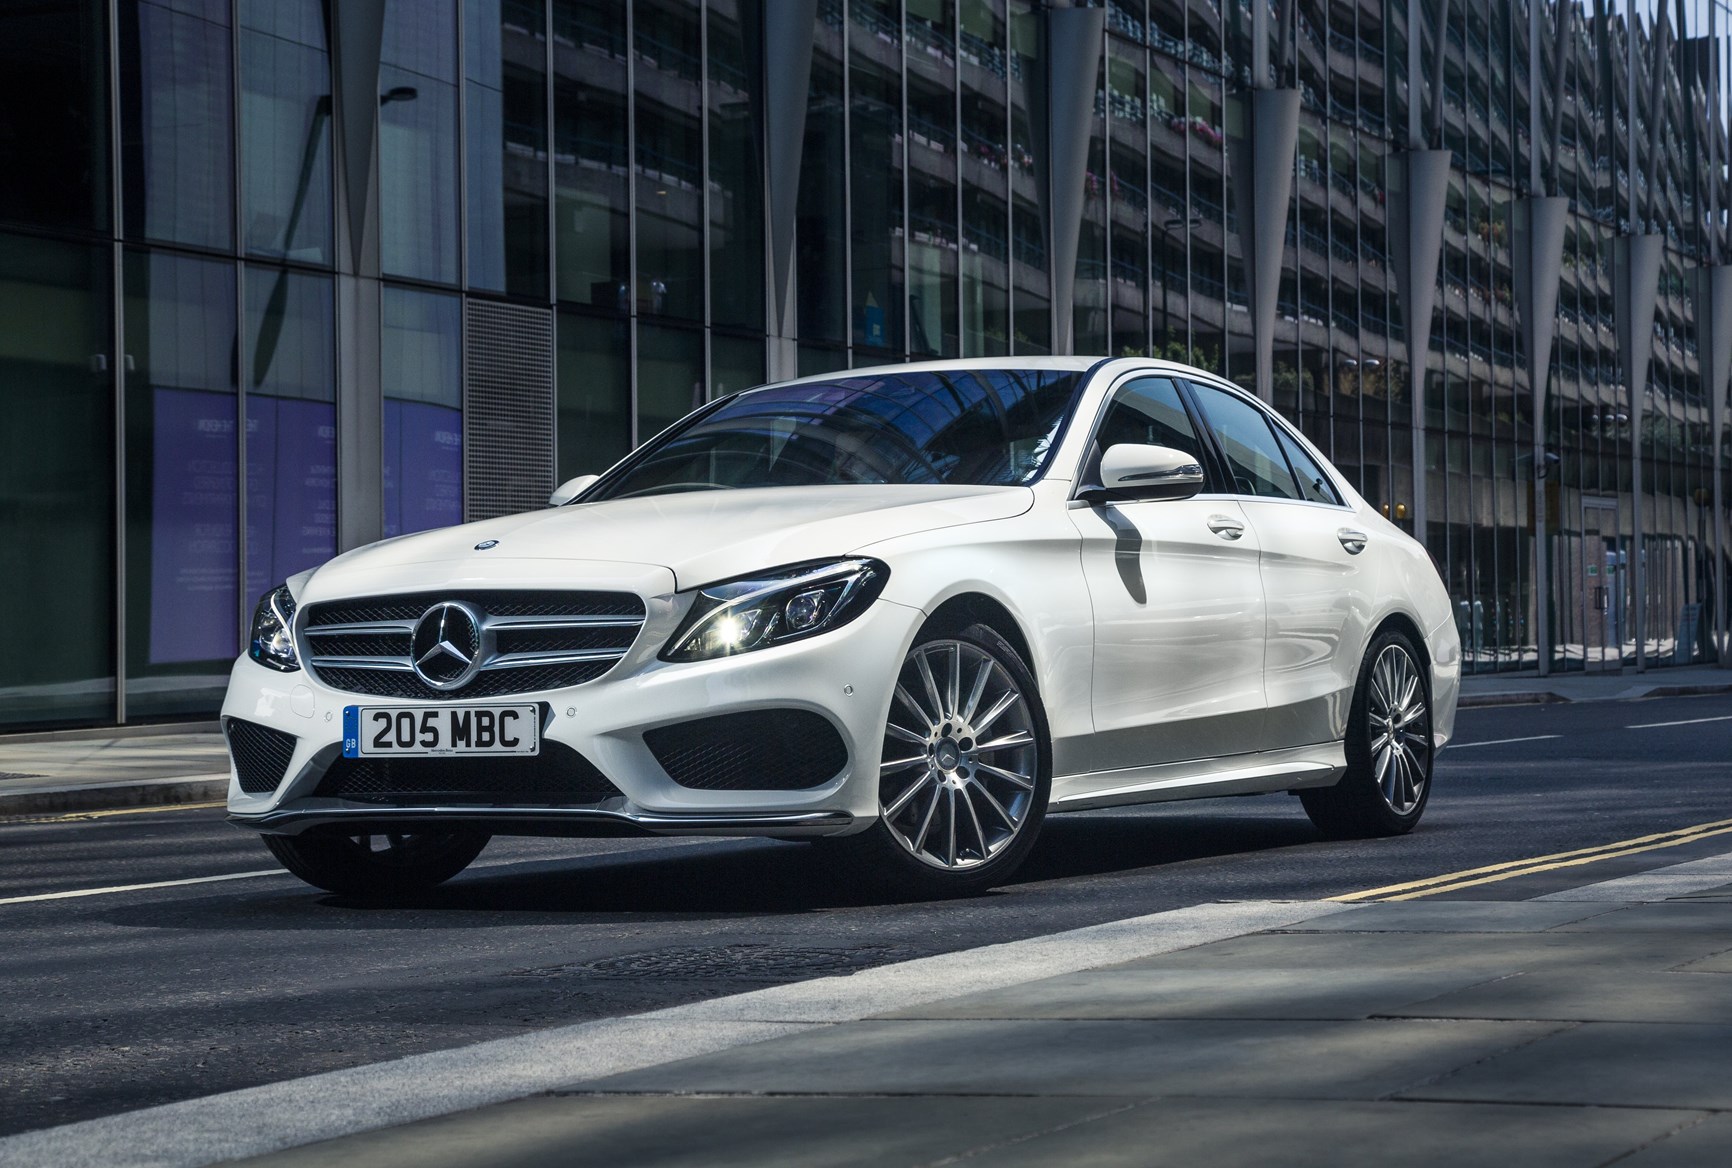 Mercedes Launches a Great Video for its C-Class